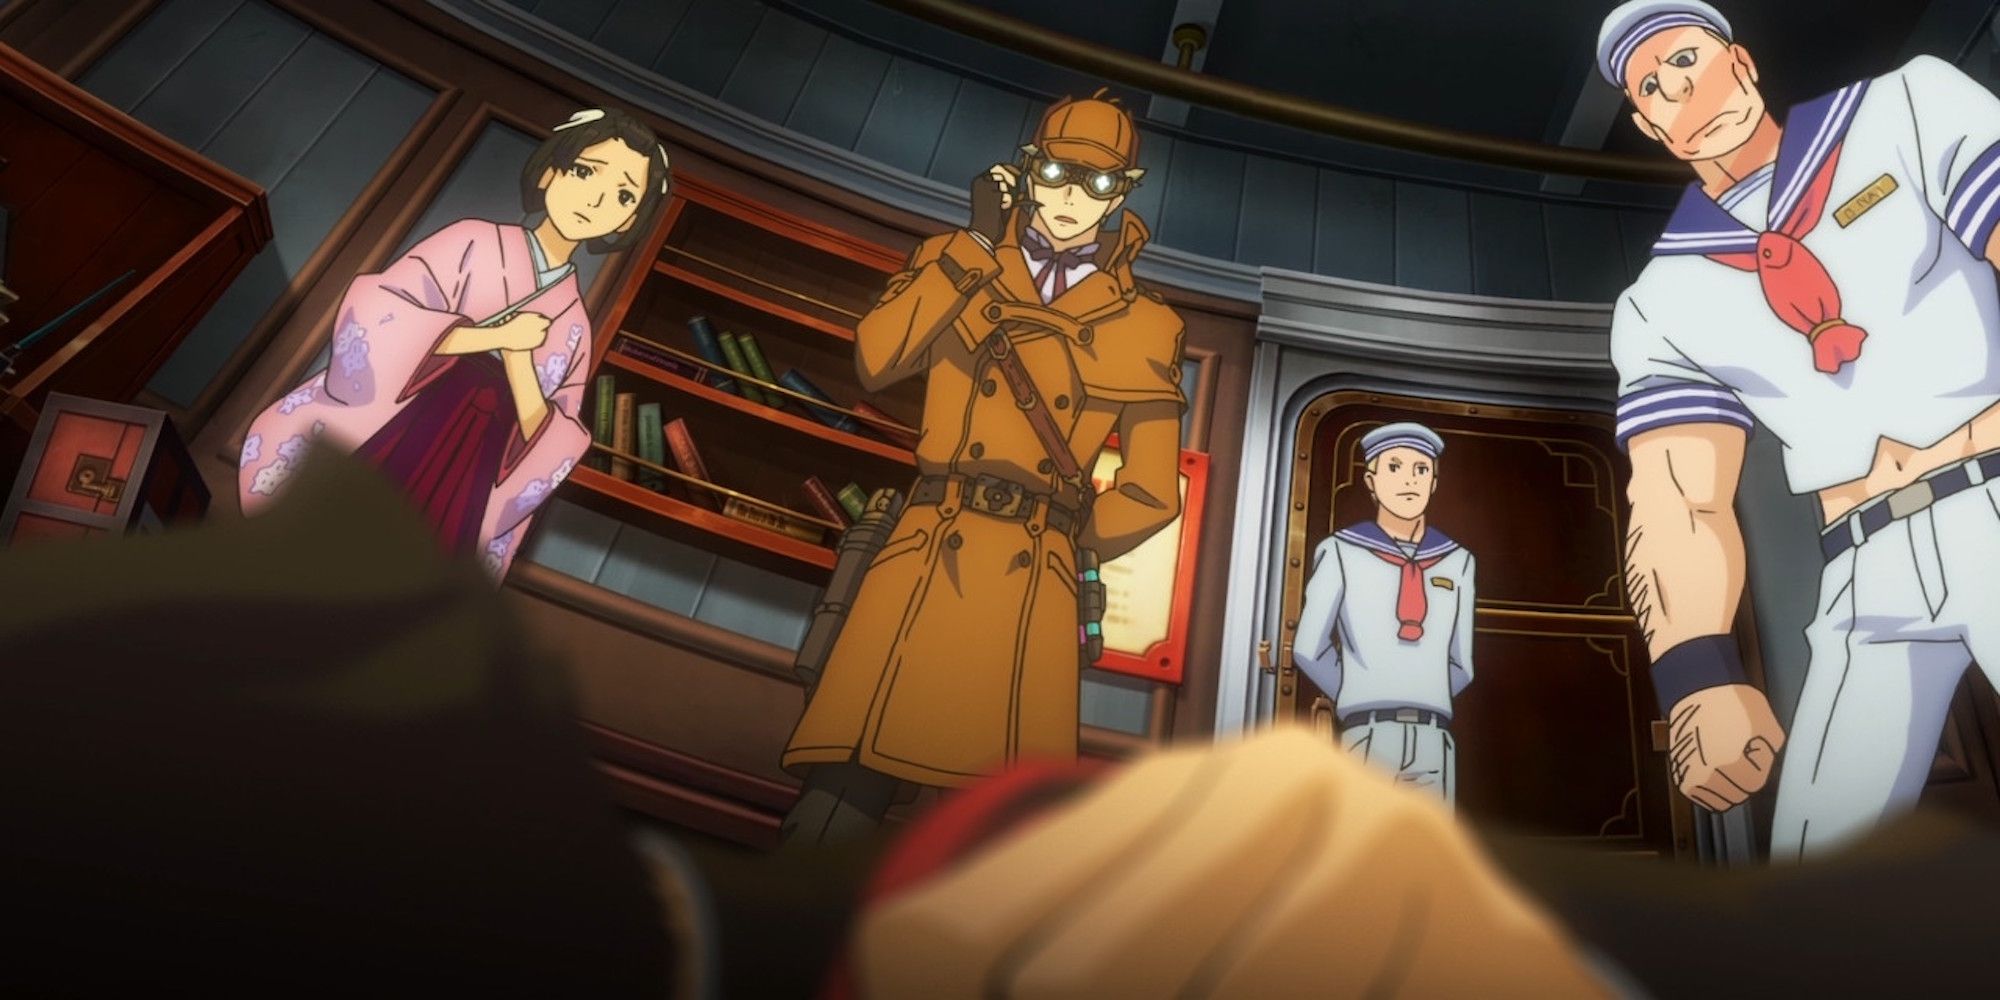 A scene featuring multiple characters from The Great Ace Attorney Chronicles